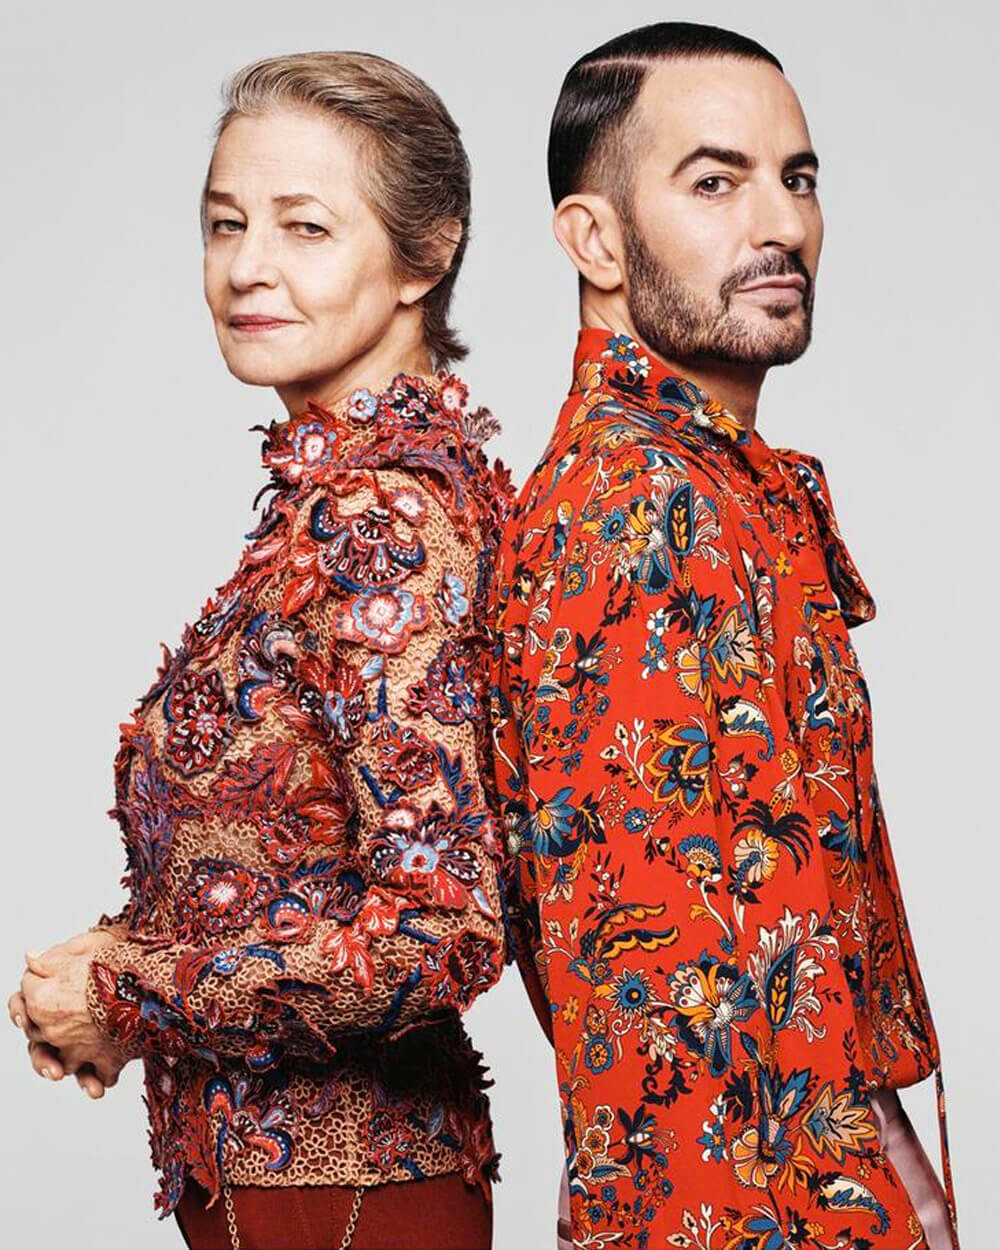 Givenchy Spring/Summer ‘20 campaign, fronted by Marc Jacobs and Charlotte Rampling